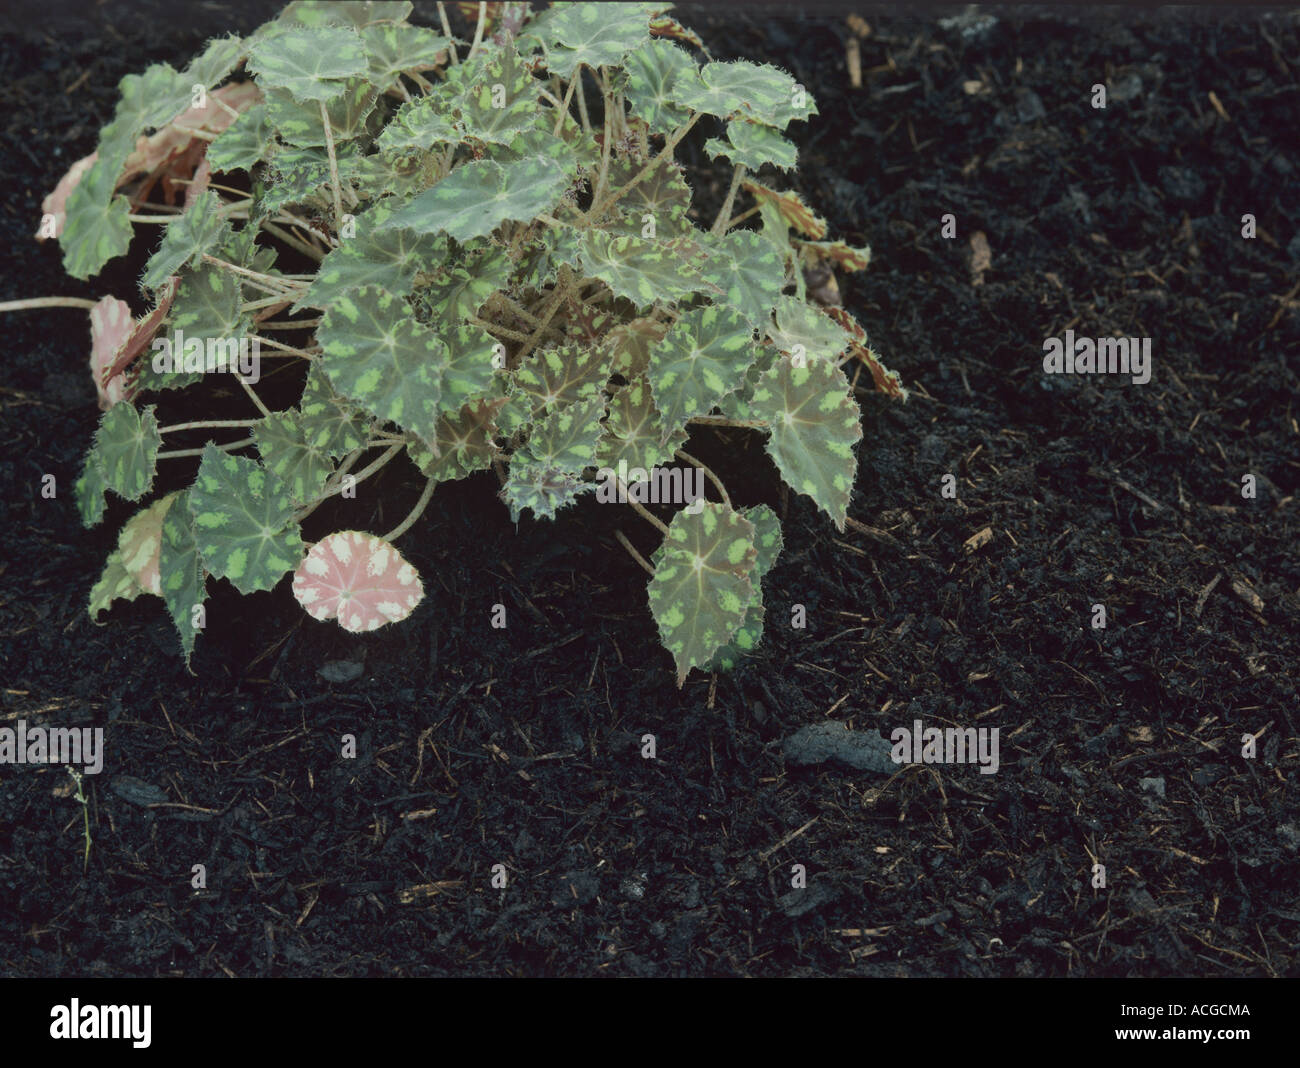 Variegated Begonia x tuberhybrida plant surrounded by wood bark mulch Stock Photo